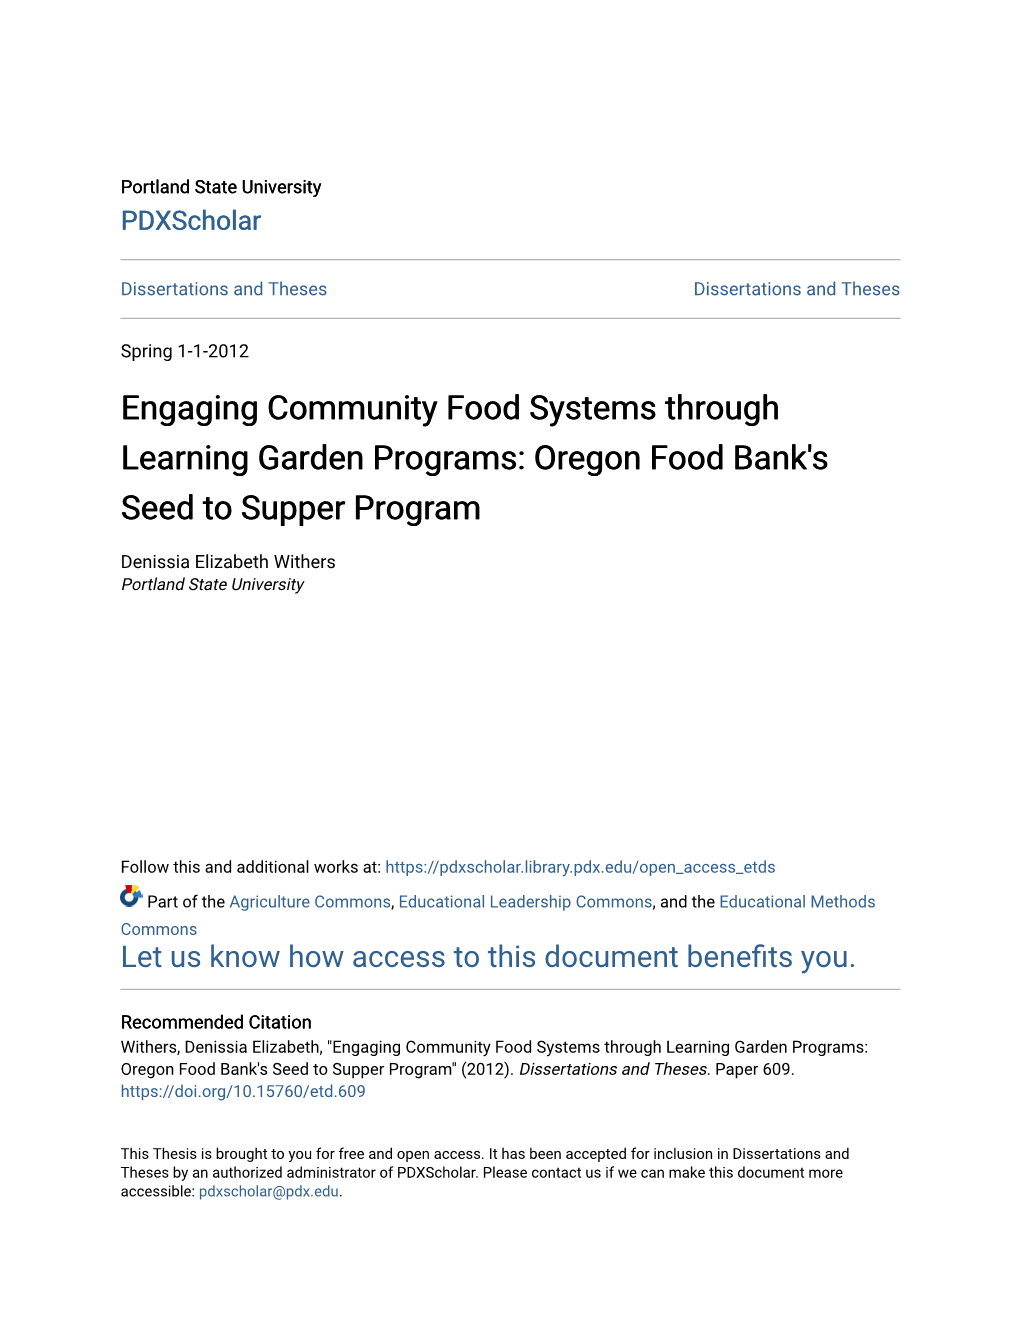 Oregon Food Bank's Seed to Supper Program